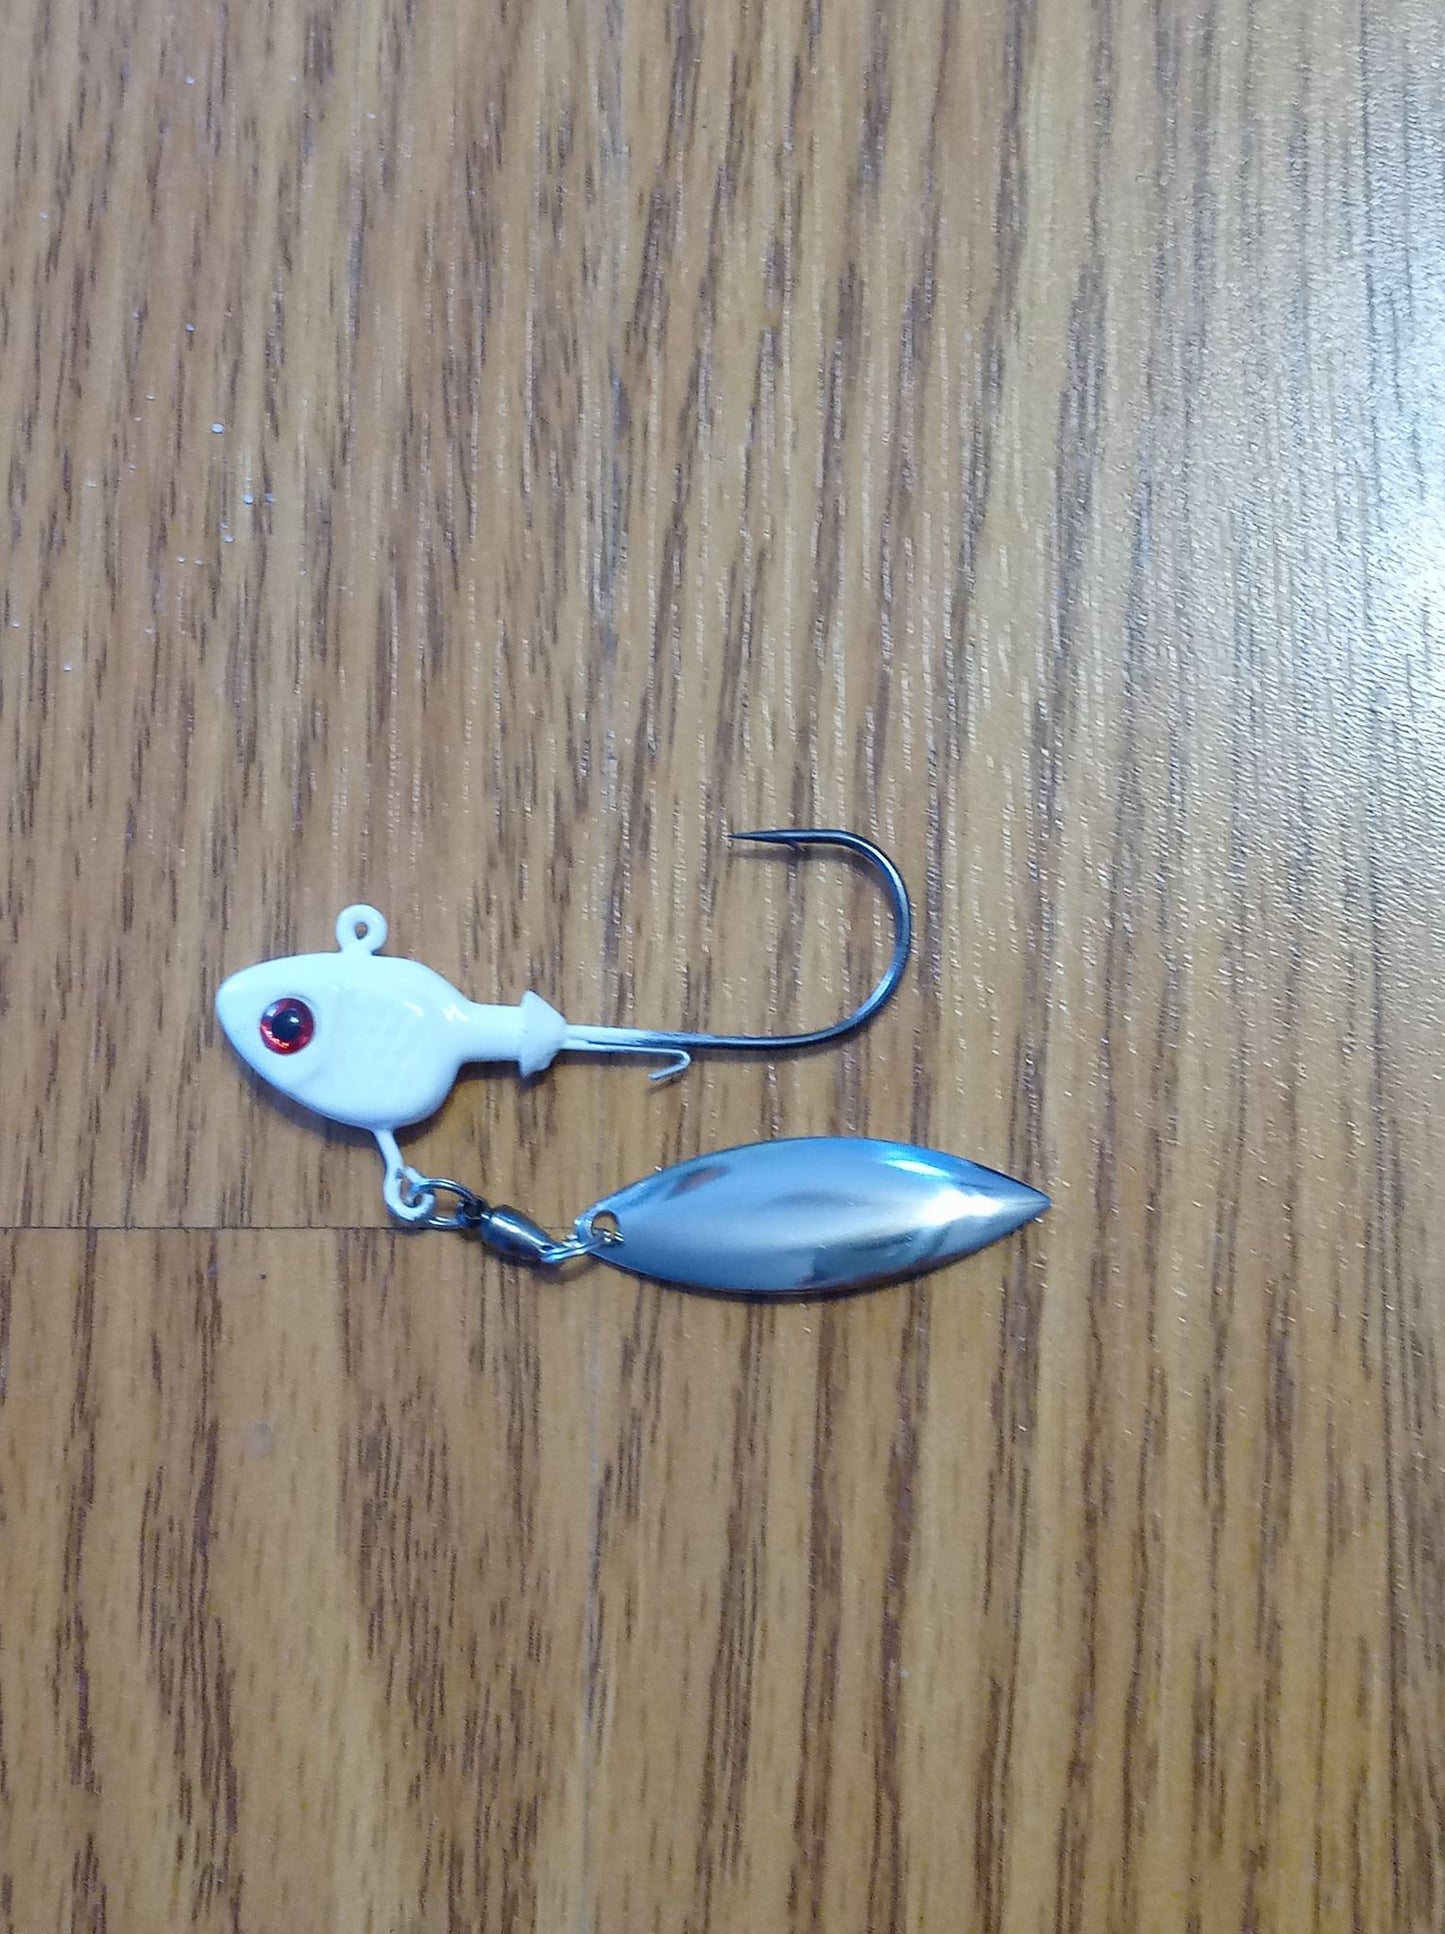 10 The DHT Underspin Lure